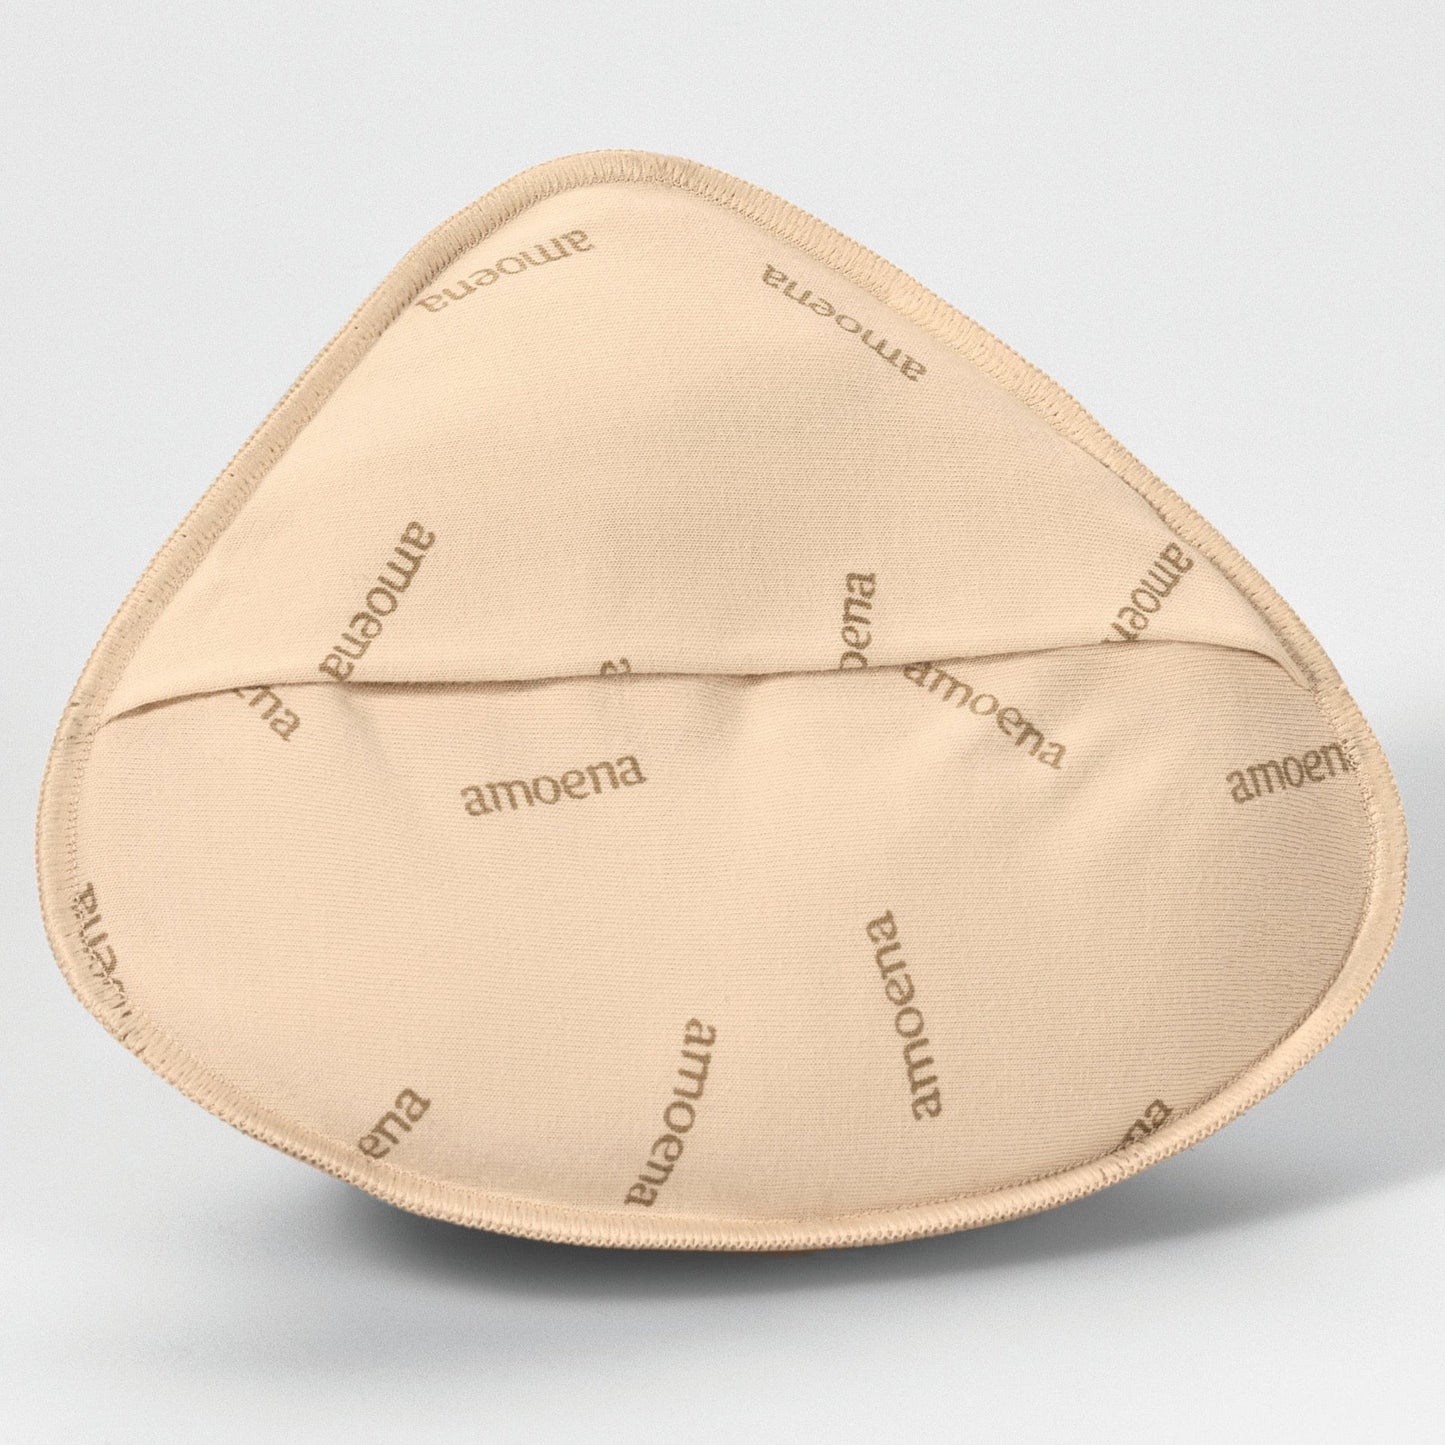 Standard Priform Breast Form in Ivory | Breast Form / Prosthesis by Amoena